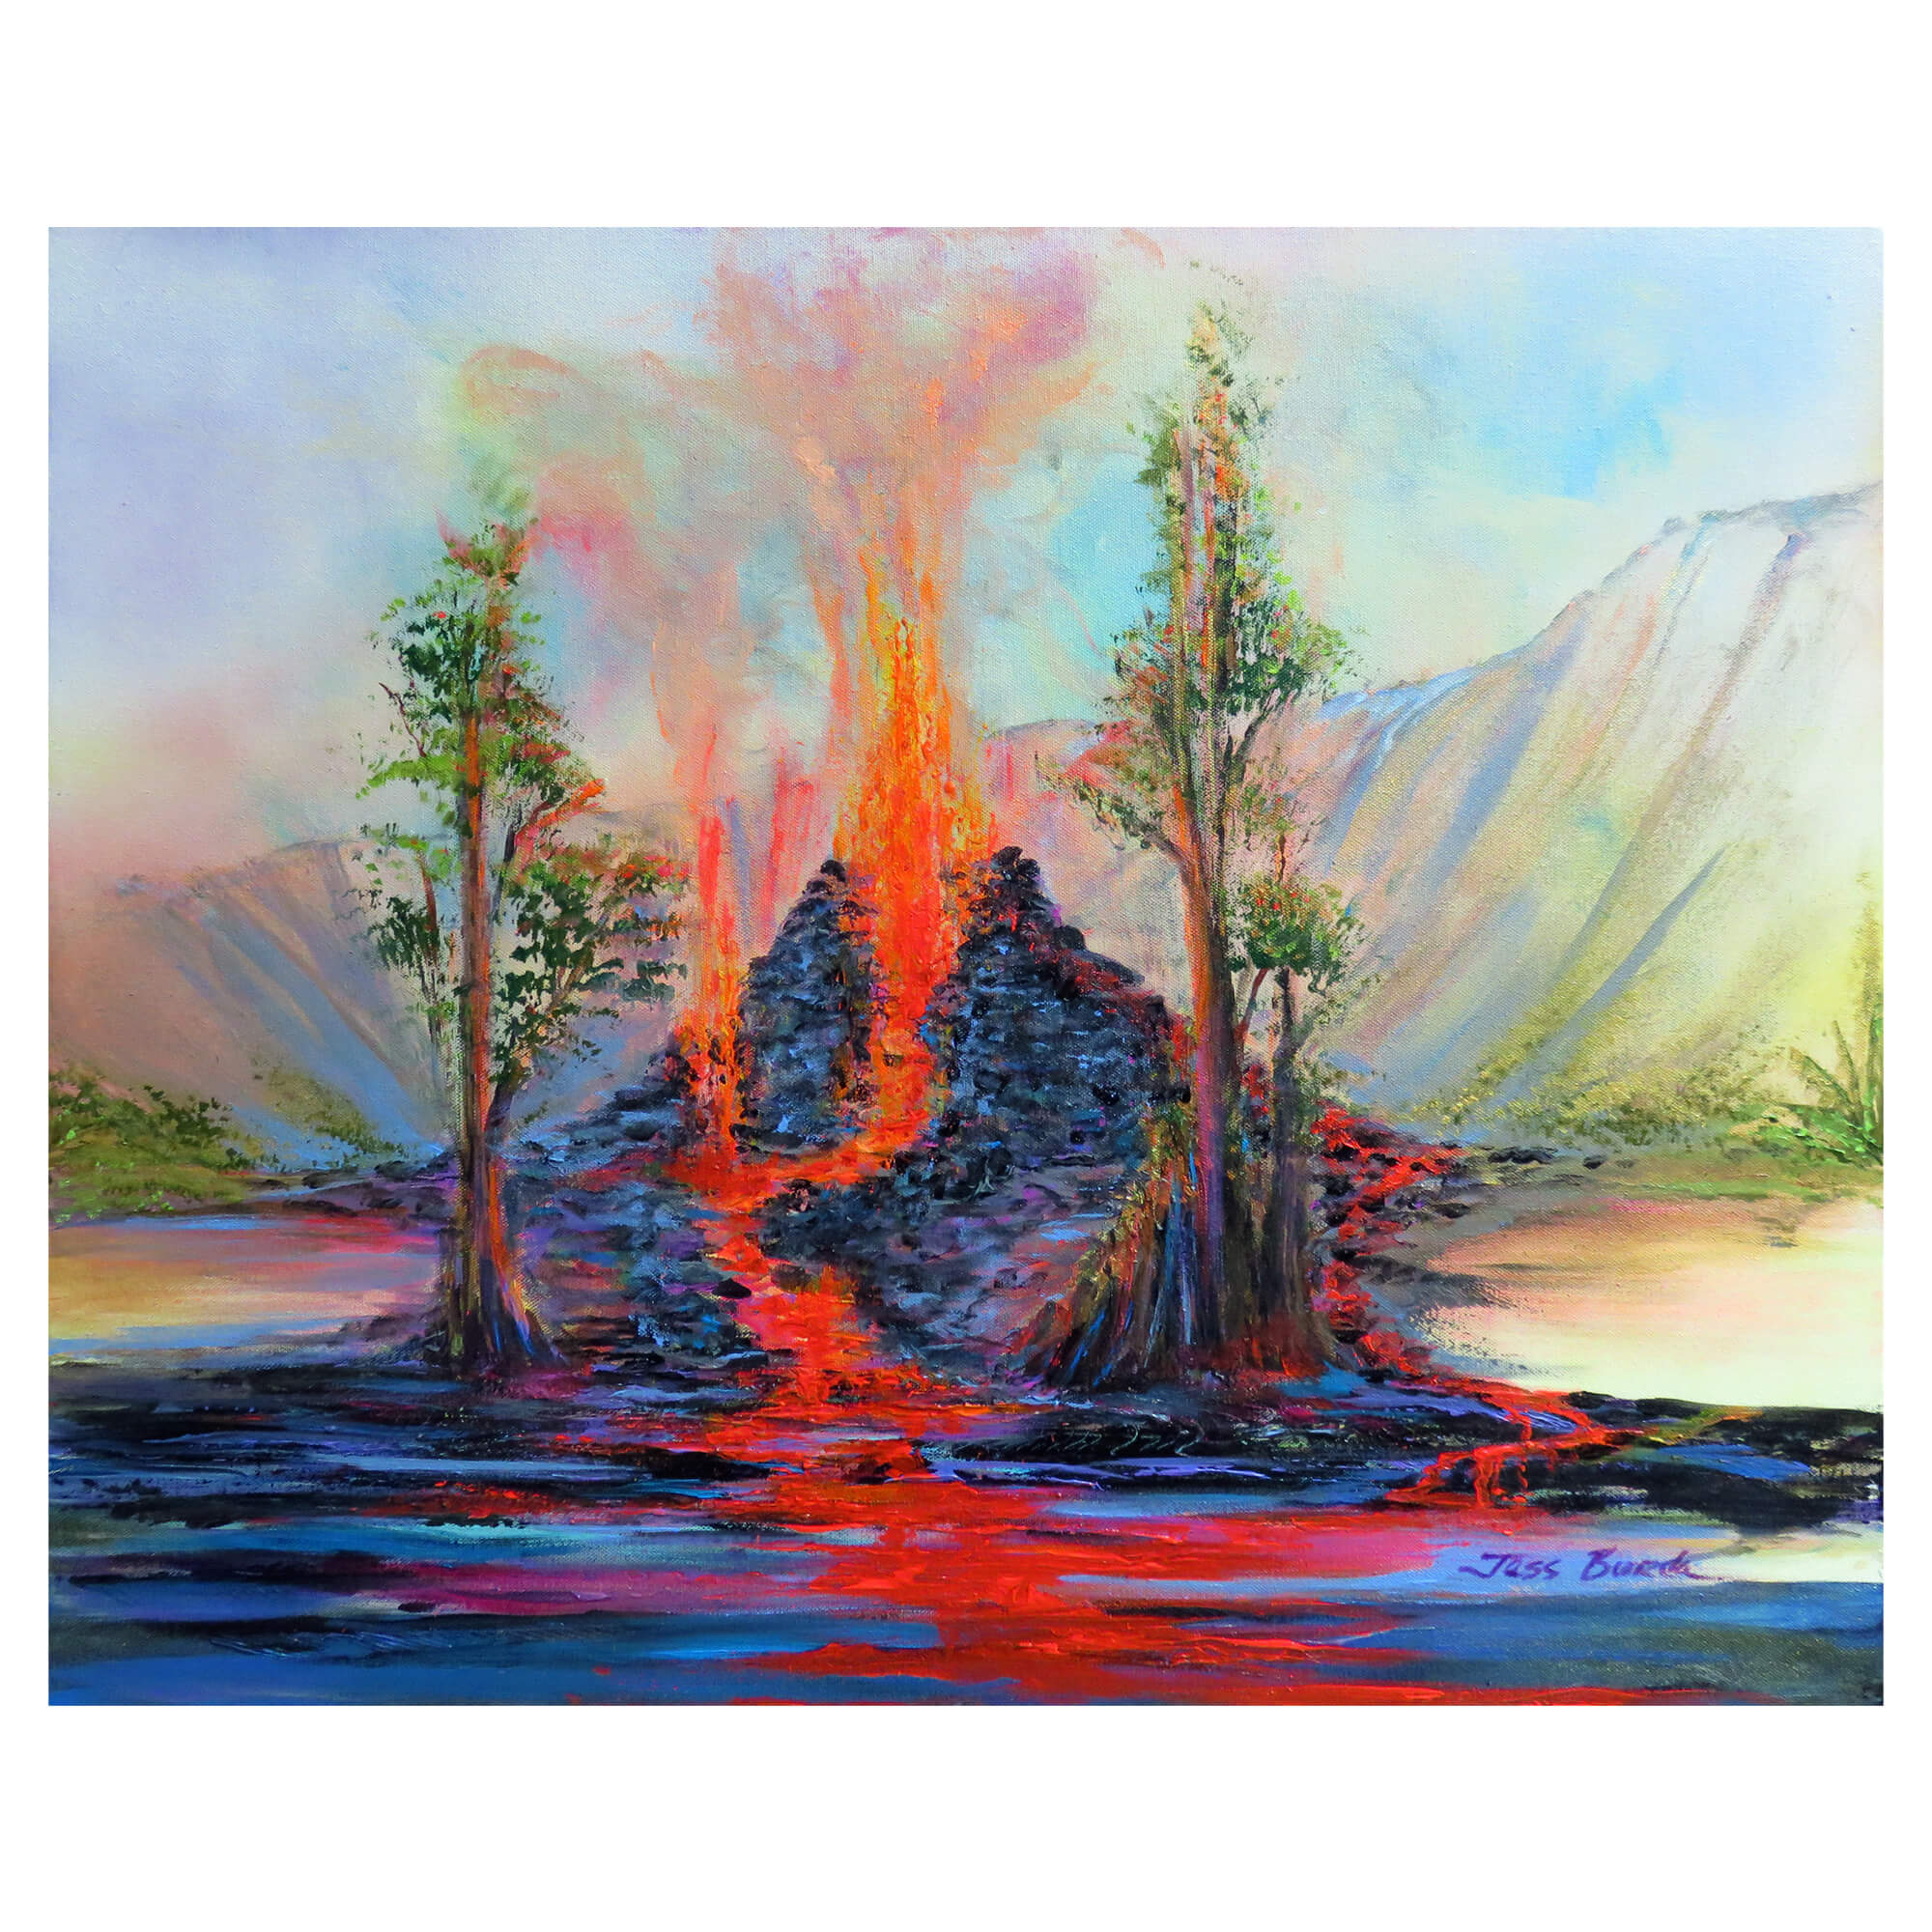 Gushing lava over a cinder cone surrounded by trees by Hawaii artist Jess Burda